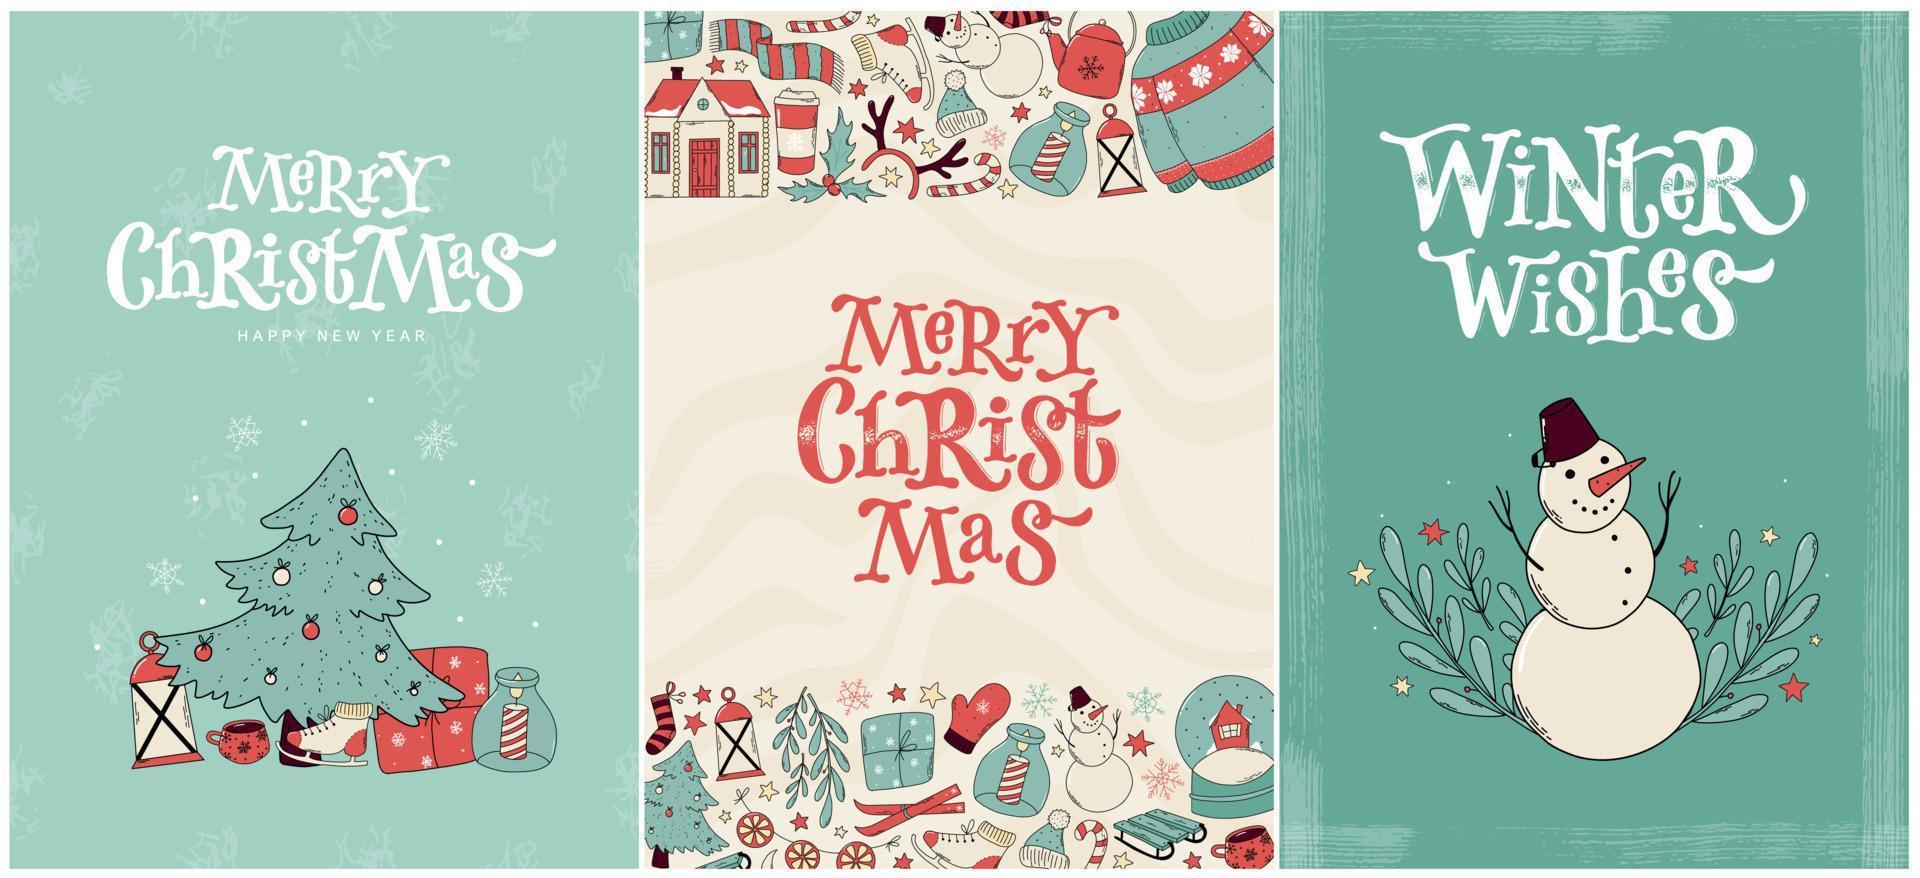 Christmas cards, posters, banners, invitations designs decorated with doodles and lettering quotes. EPS 10 vector